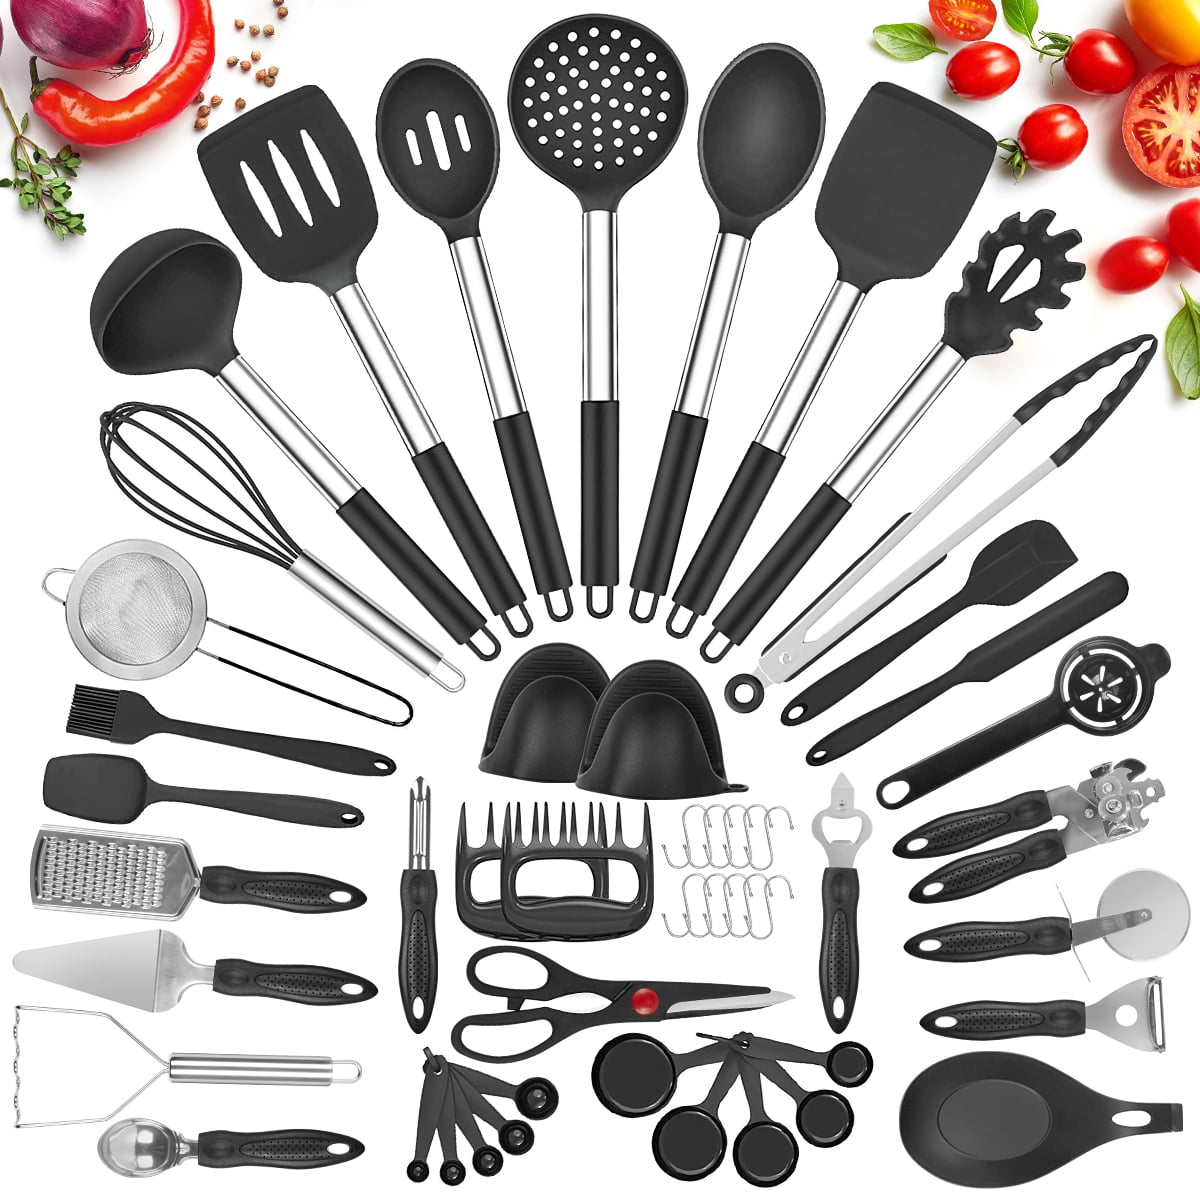 Details about   Silicone Kitchen Tools Set Cooking Tools Utensils Set Spatula Heat-resistant 